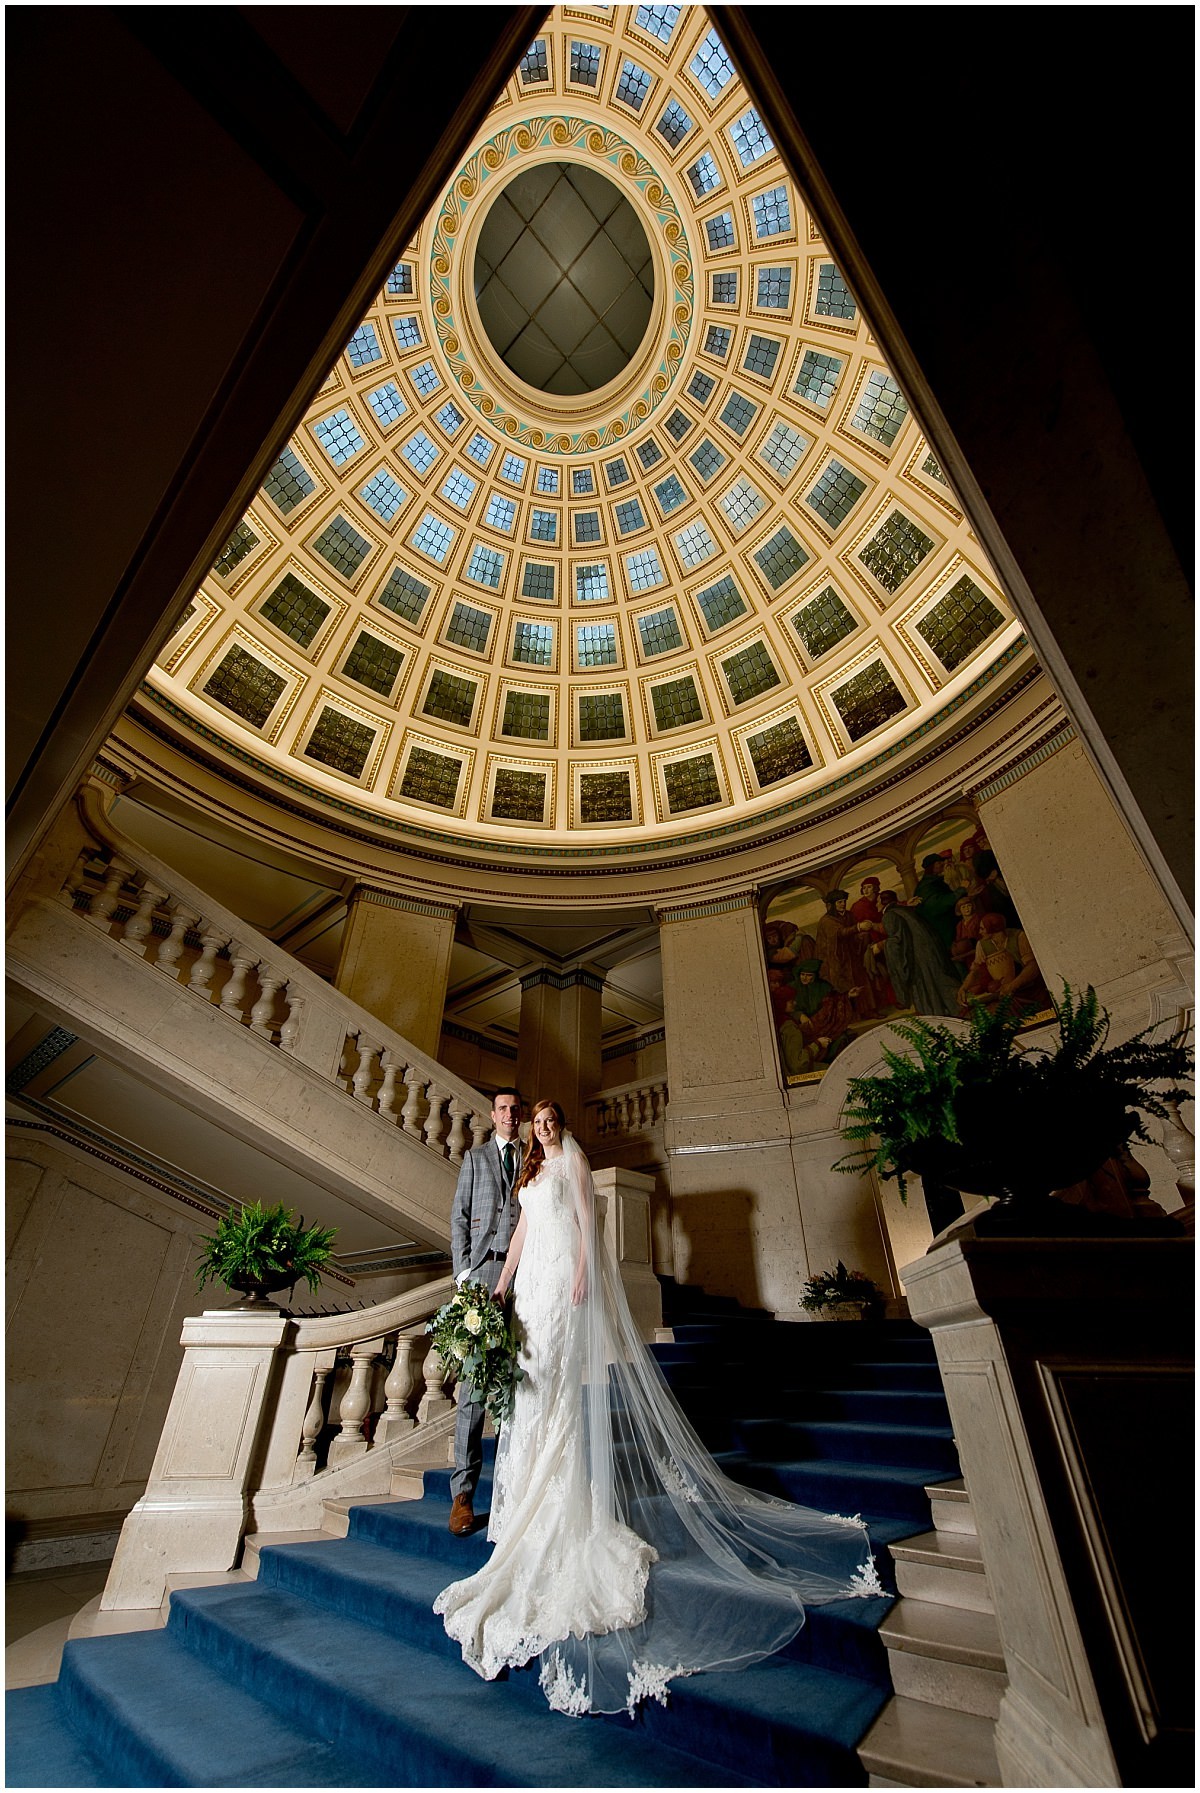 Bride and groom photograph at Nottinghams Council House